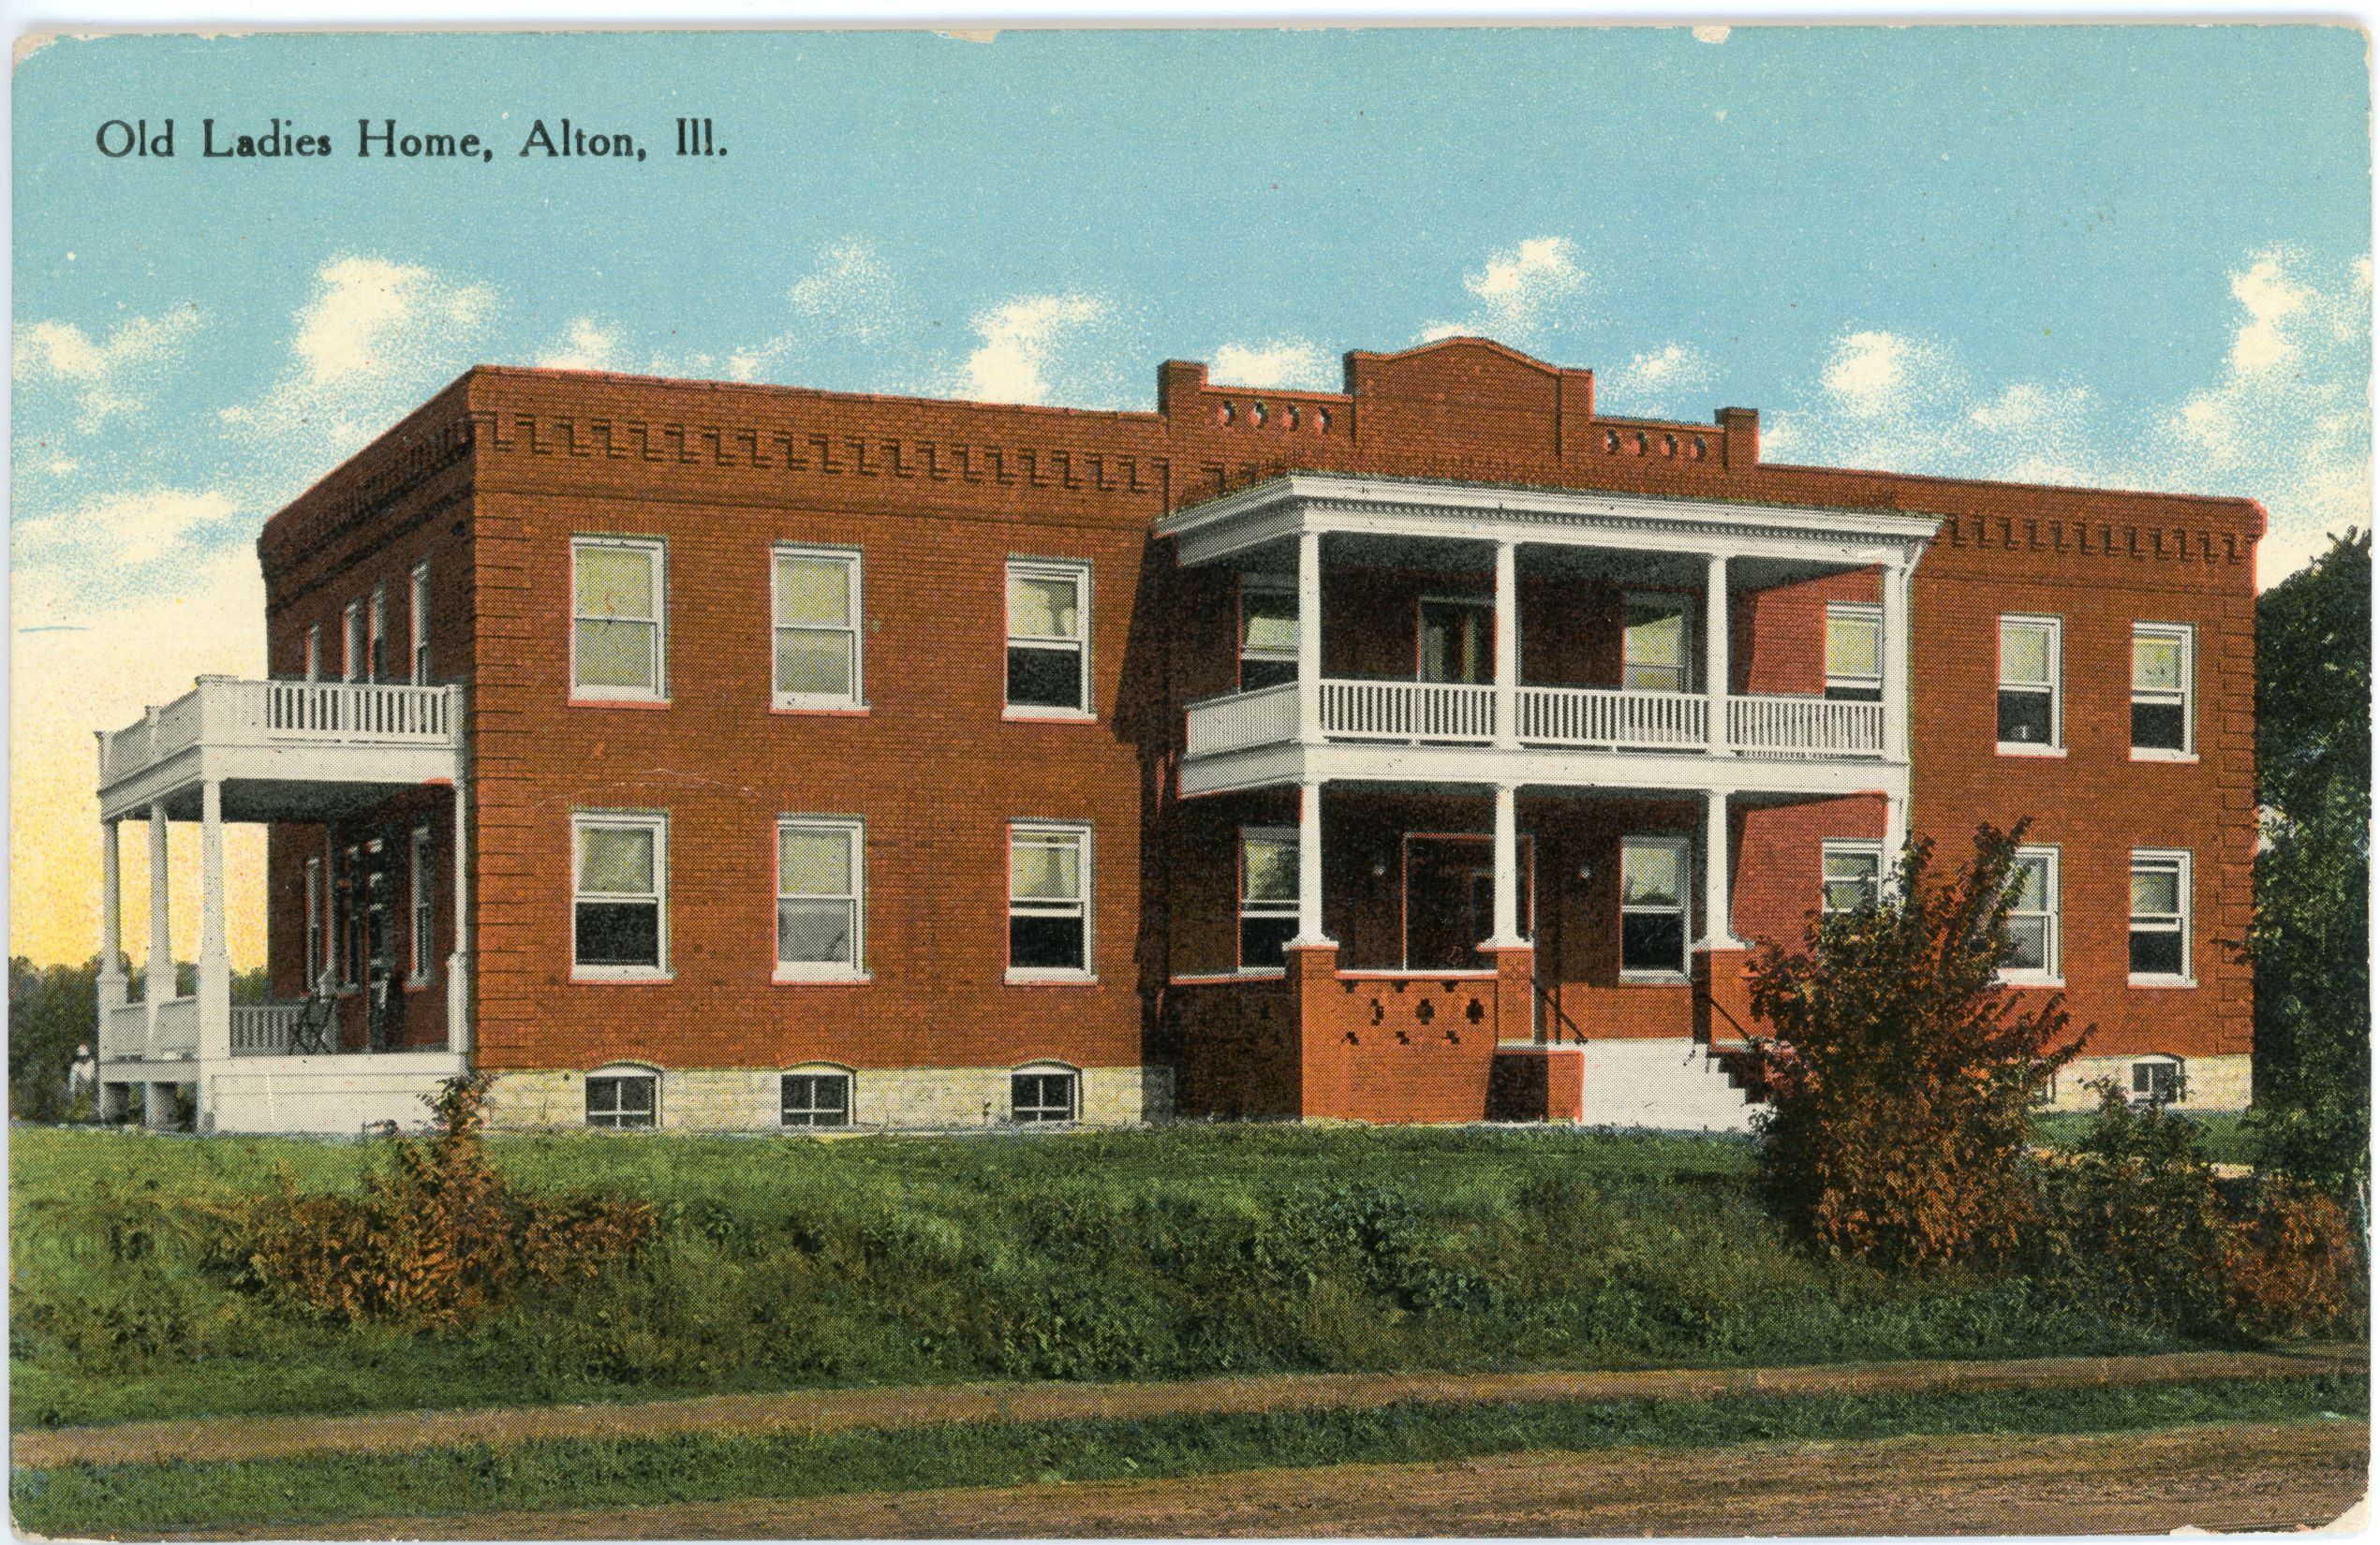 The Alton Woman’s Home was located at 2224 State Street